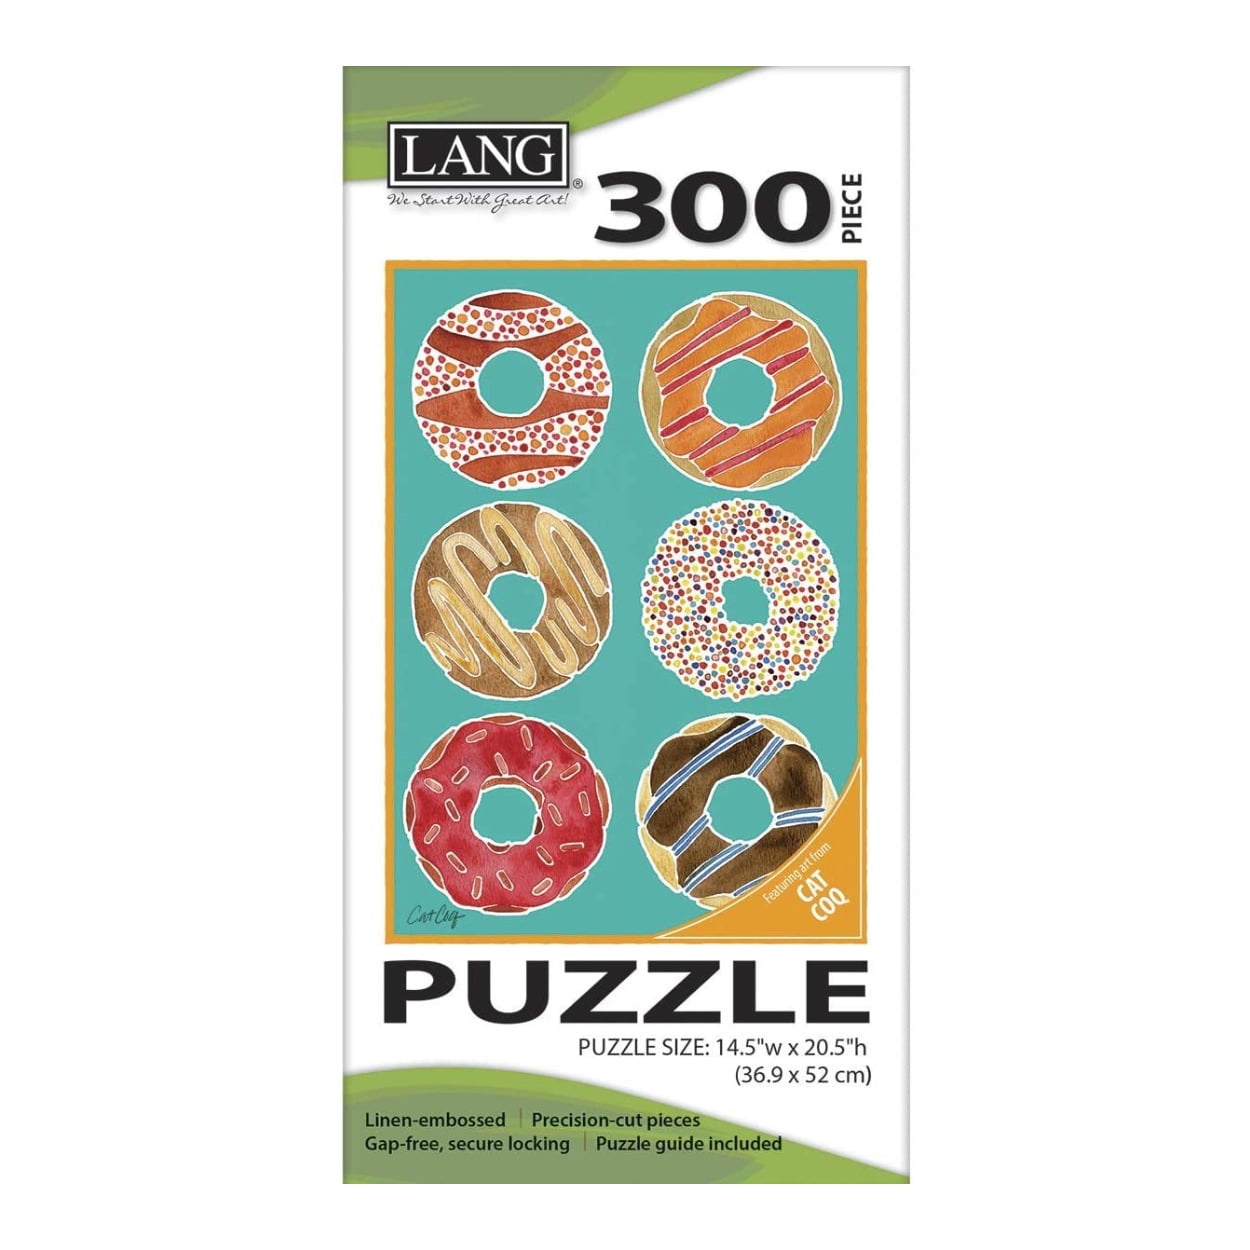 LANG ART BRAND NEW DONUTS 300 PIECE JIGSAW PUZZLE 5040119 